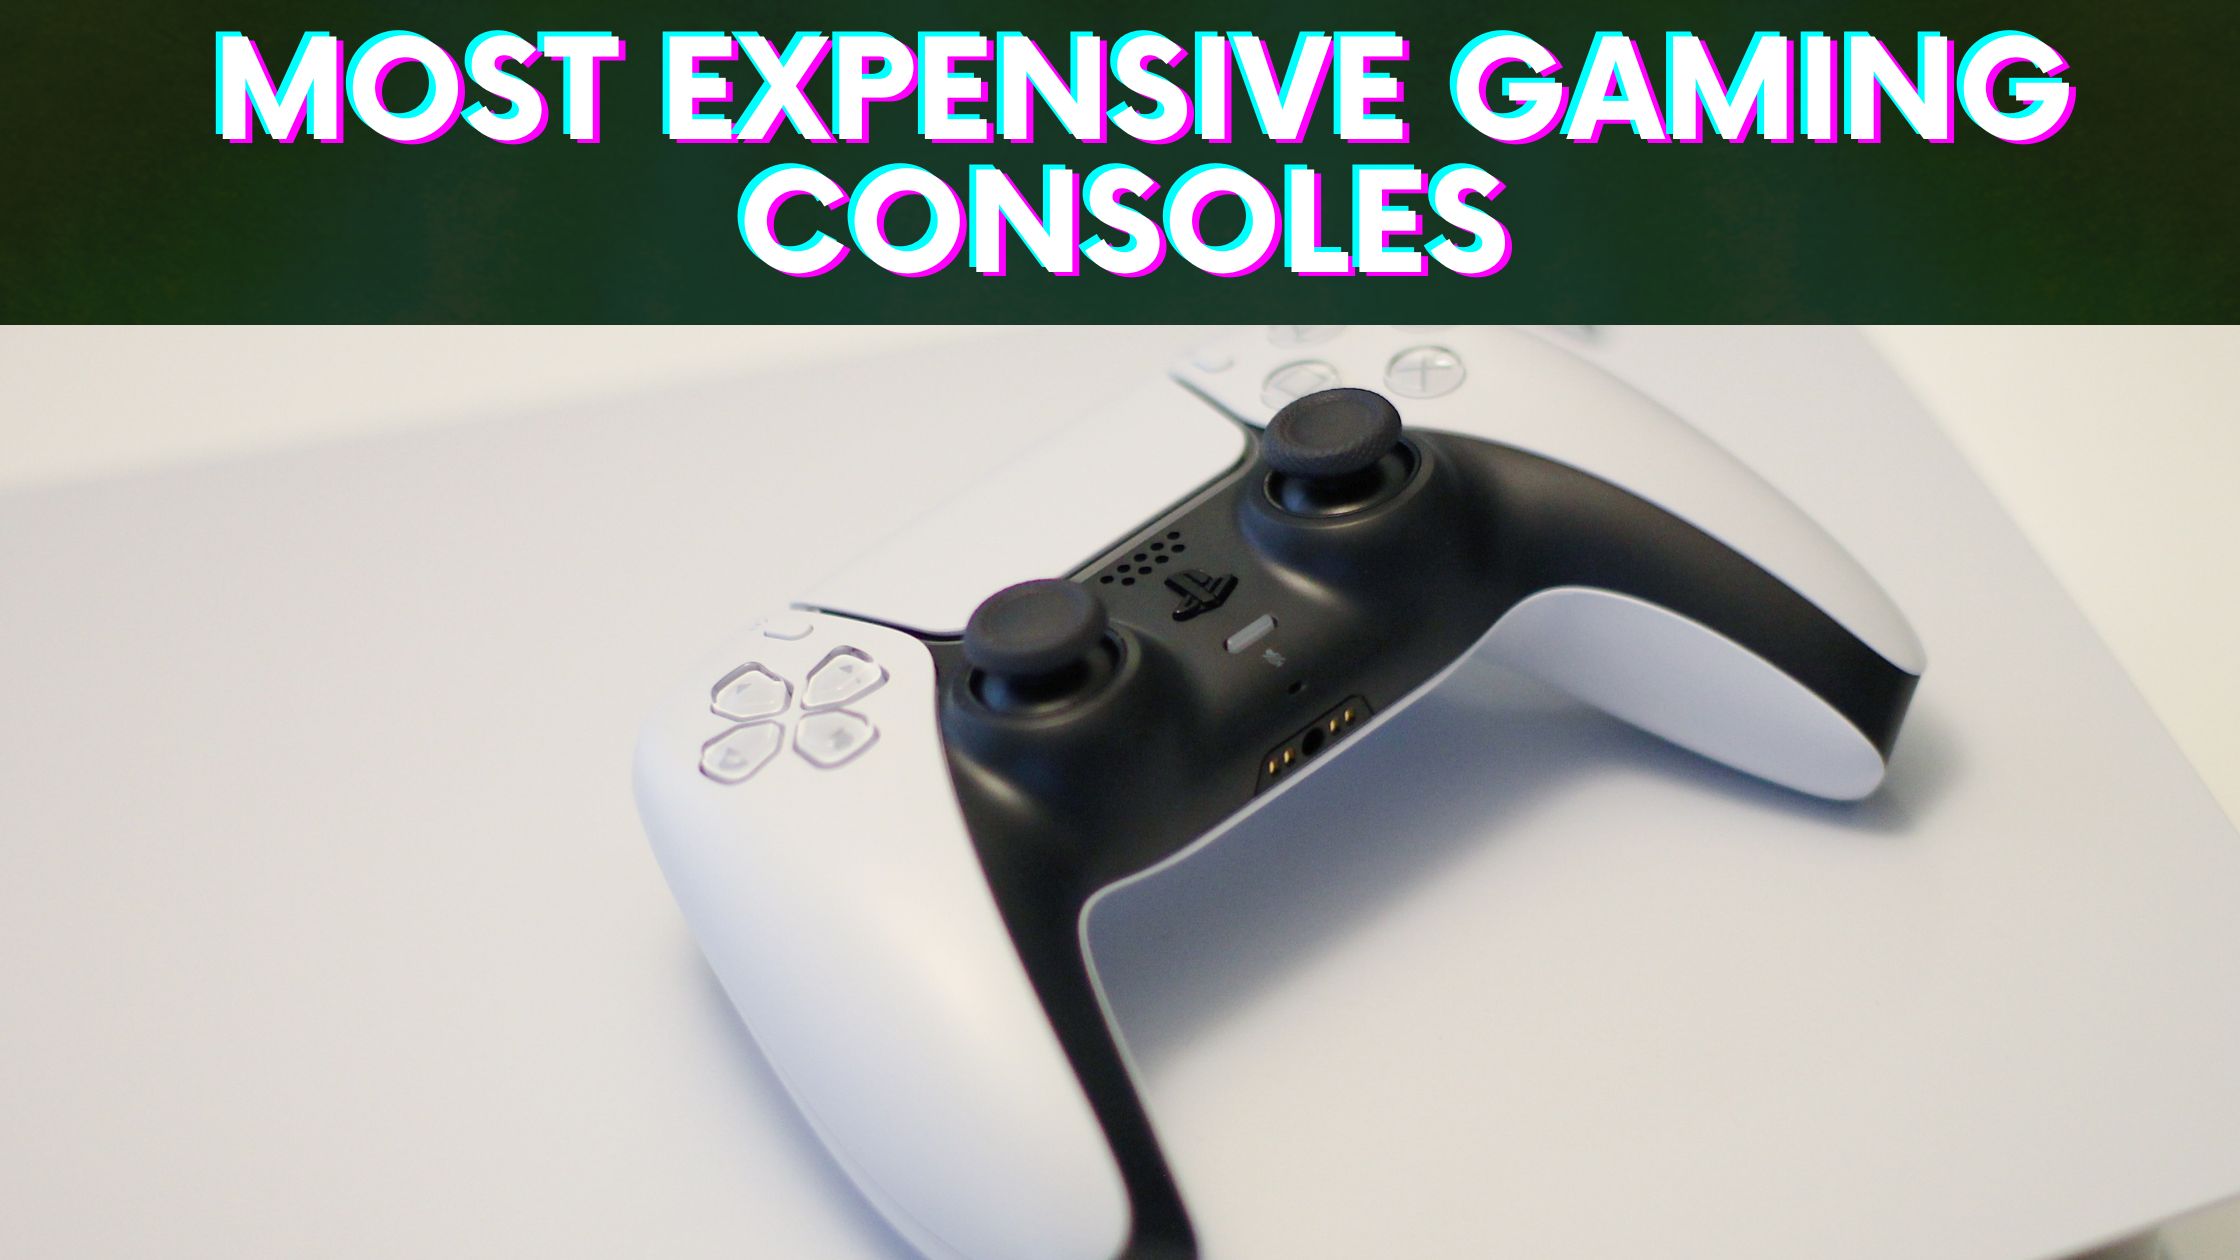 Most Expensive Gaming Consoles